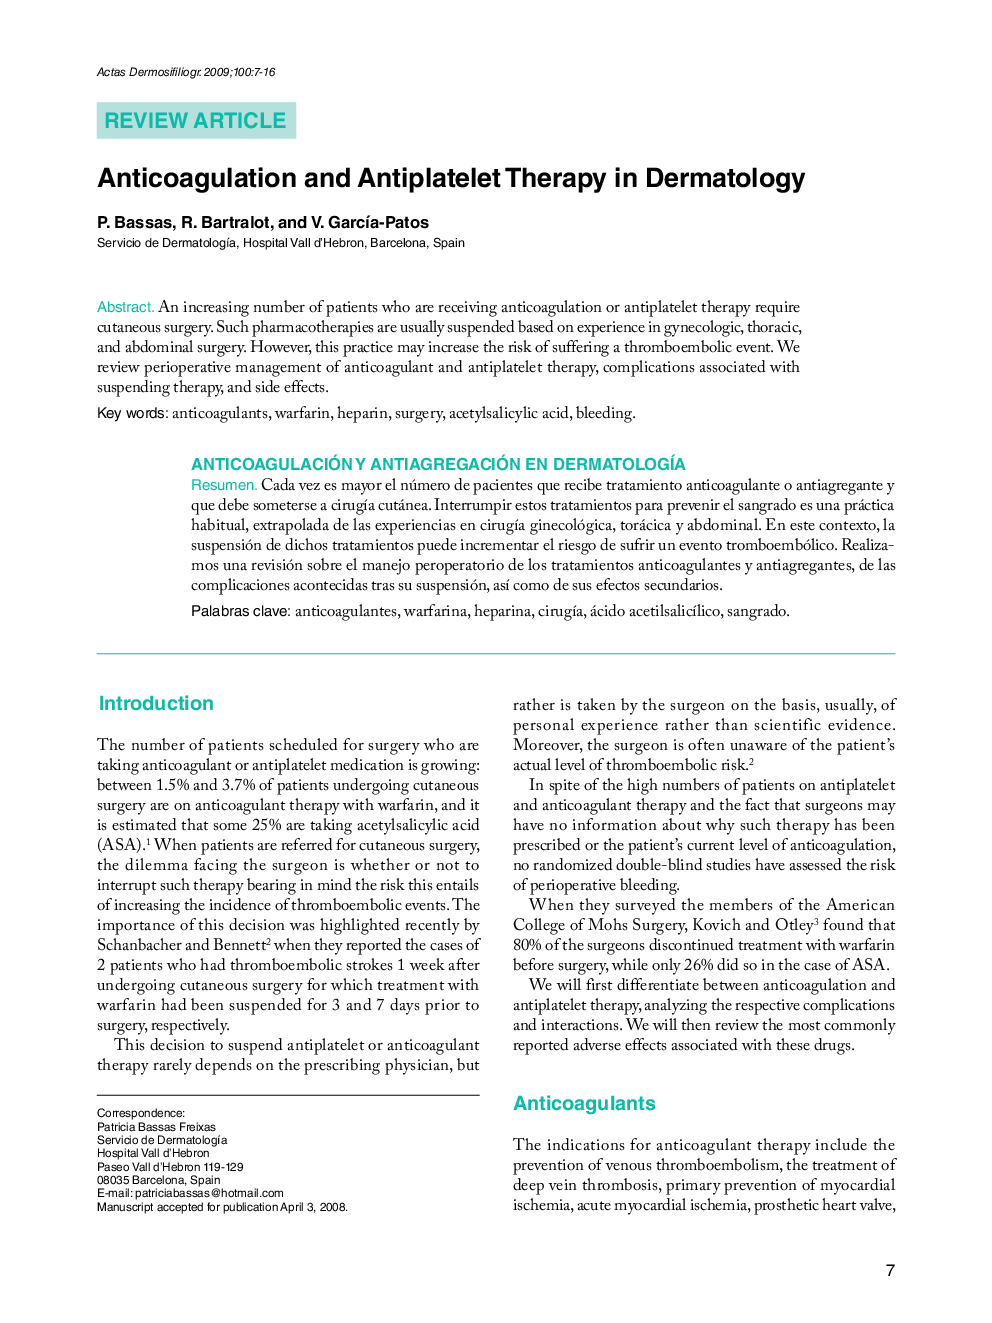 Anticoagulation and Antiplatelet Therapy in Dermatology